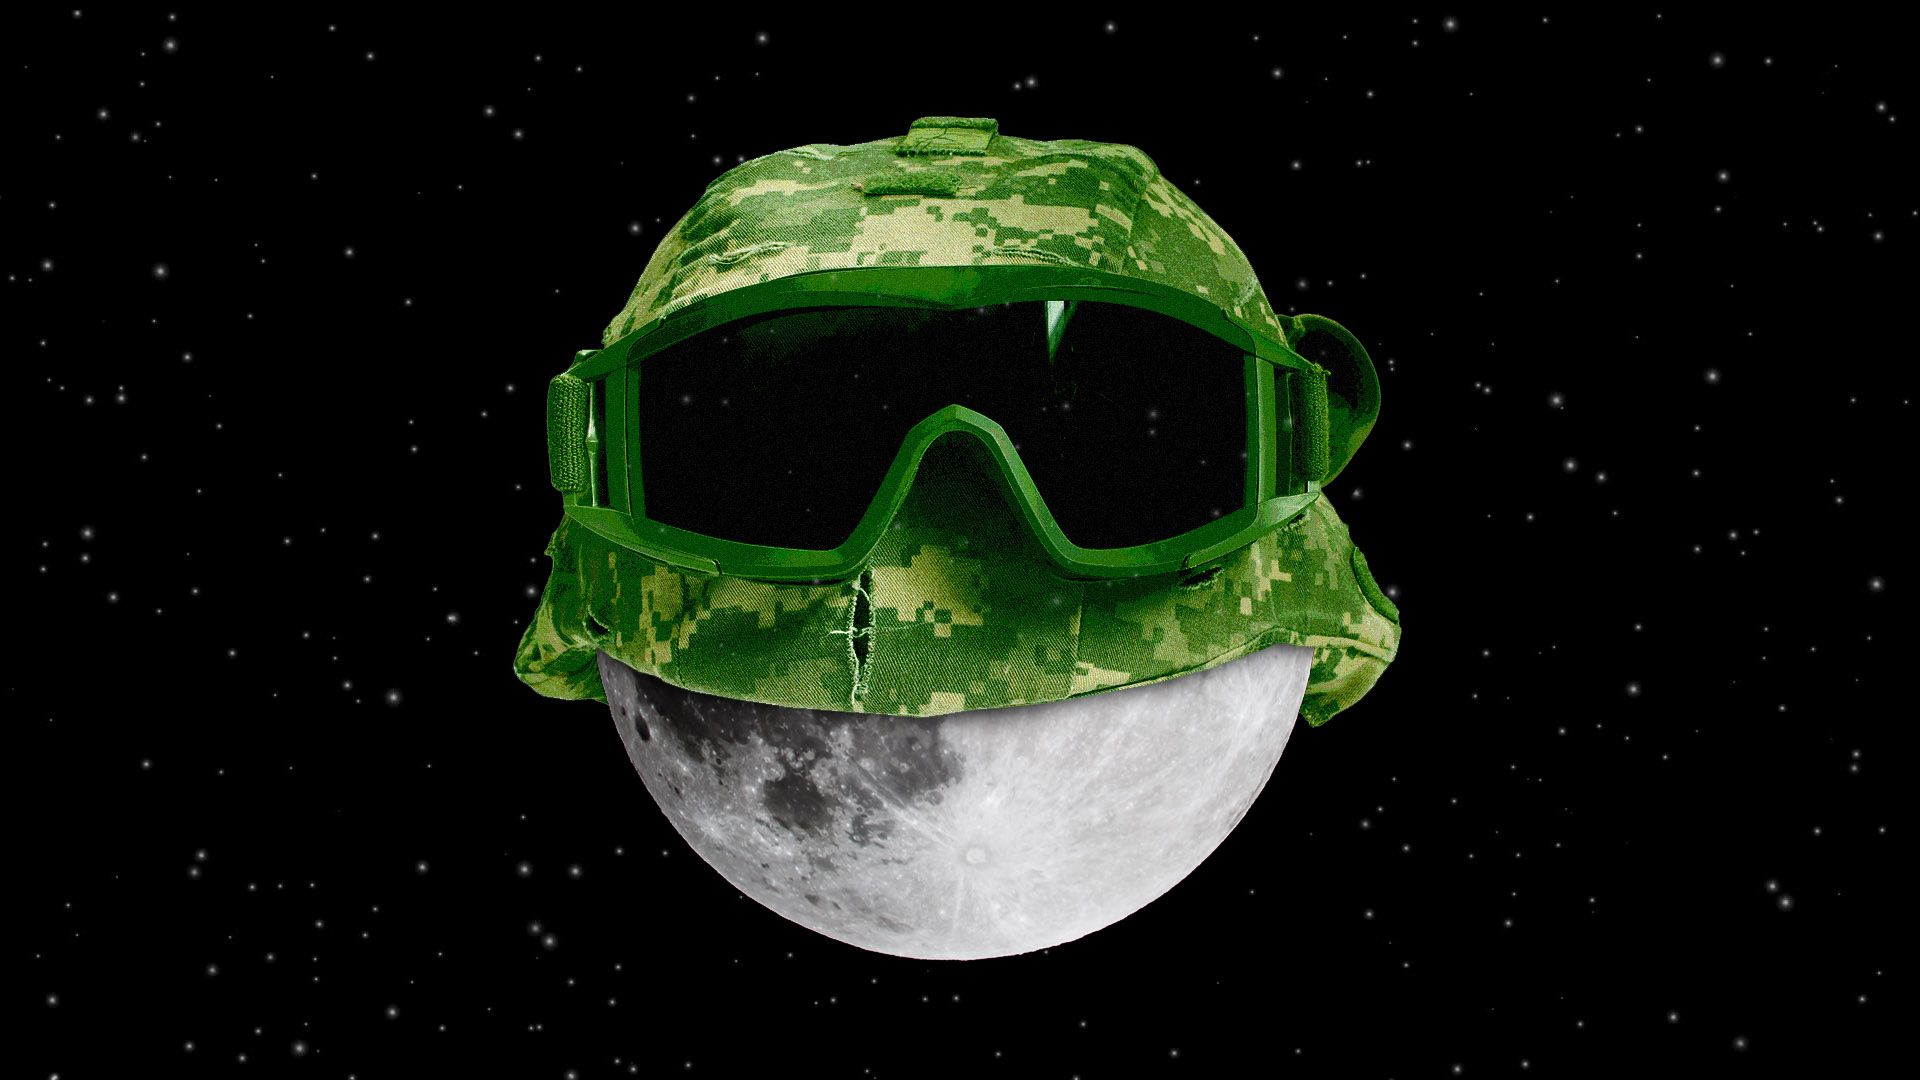 Moon with military goggles and a helmet.